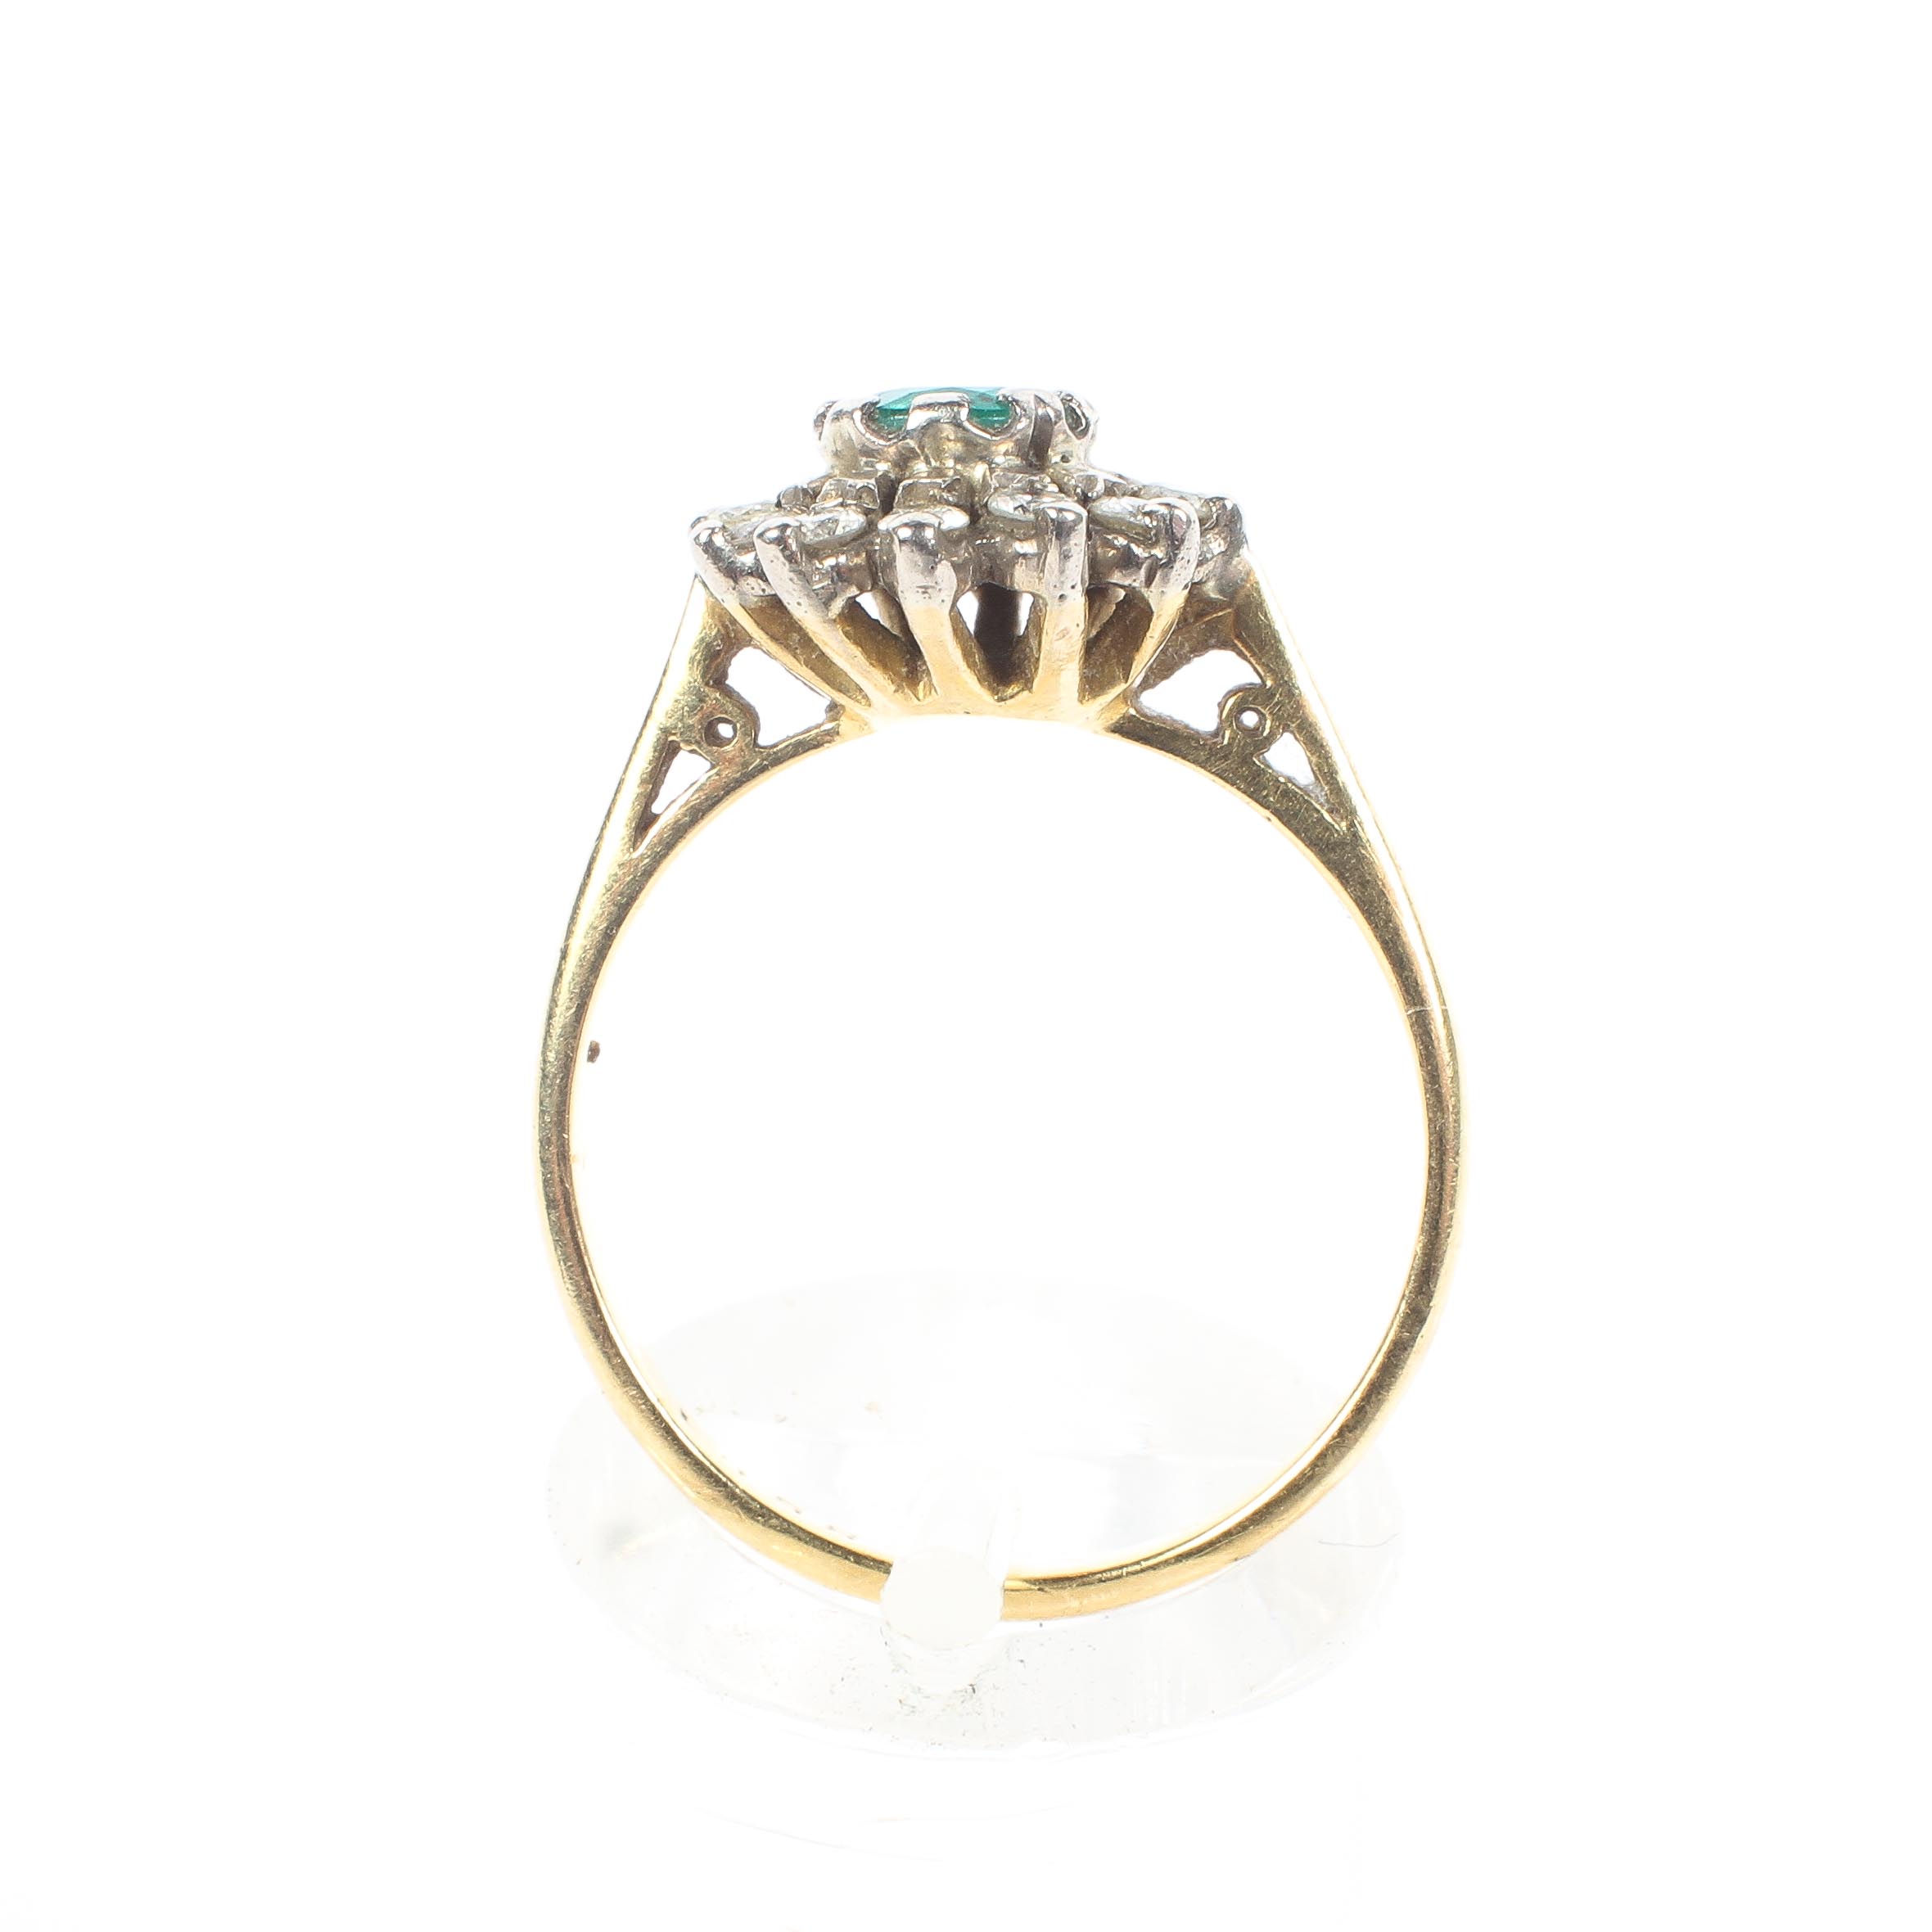 An 18ct gold emerald and diamond daisy ring, - Image 3 of 4